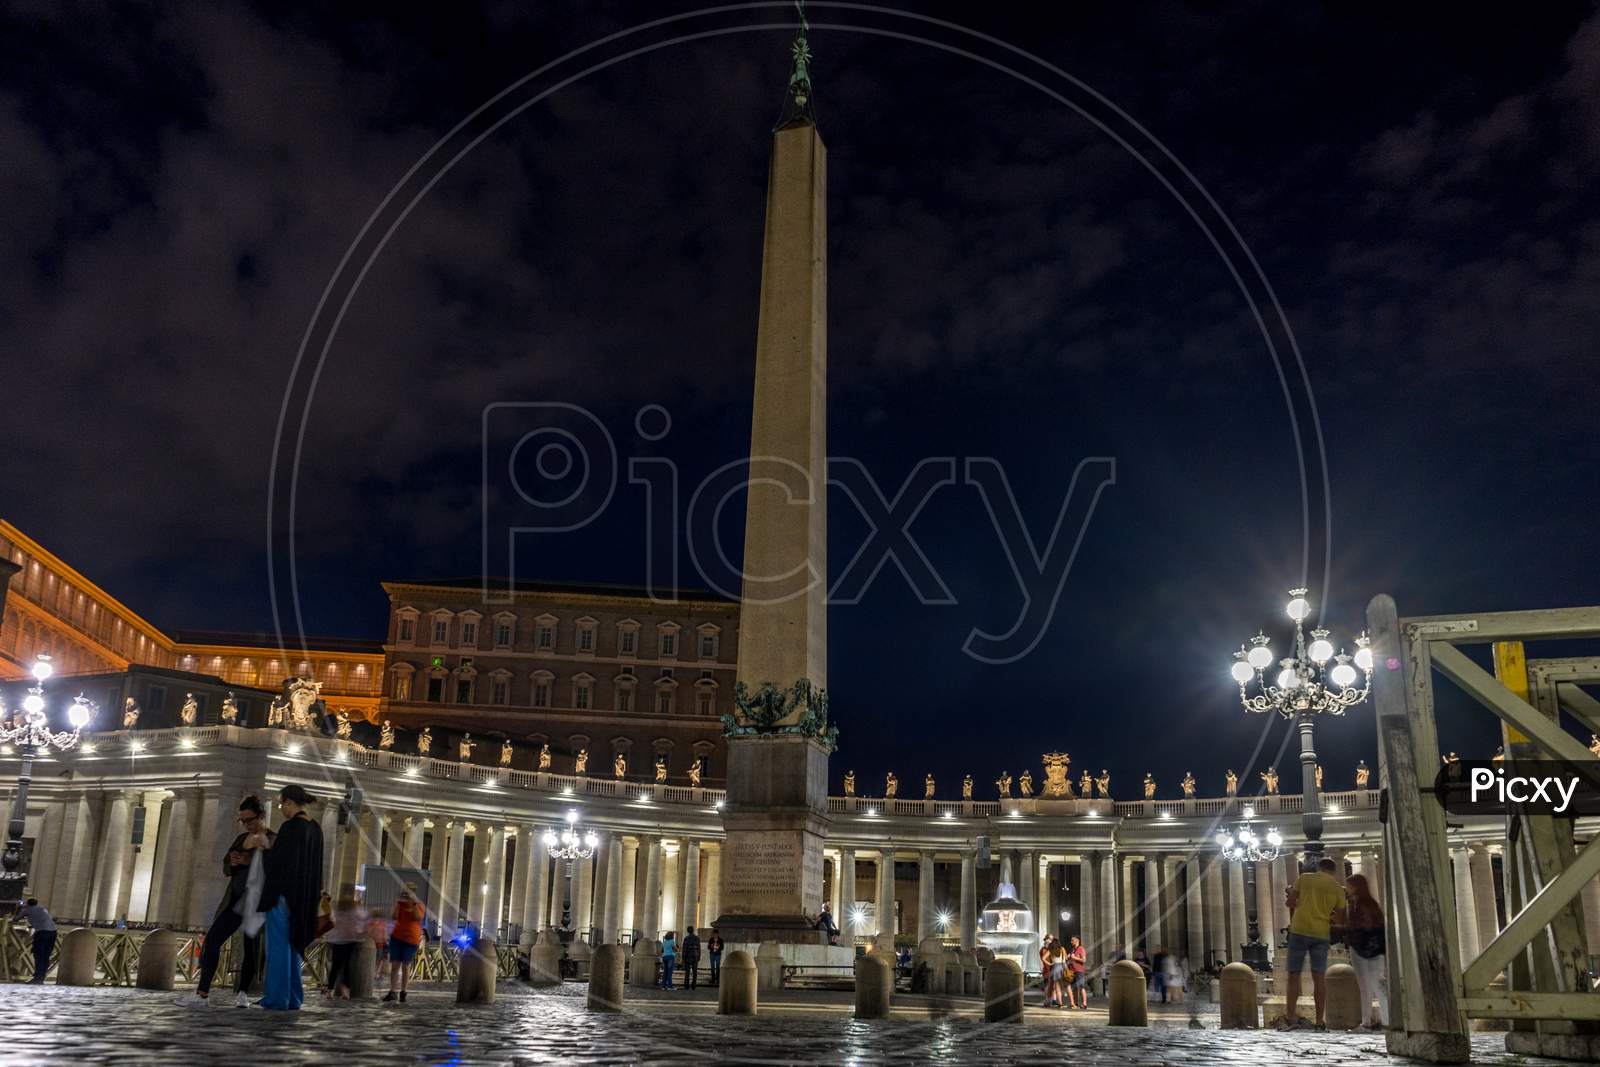 Vatican City,Italy - 23 June 2018: The Obelisk At St.Peters Square In Vatican City At Night